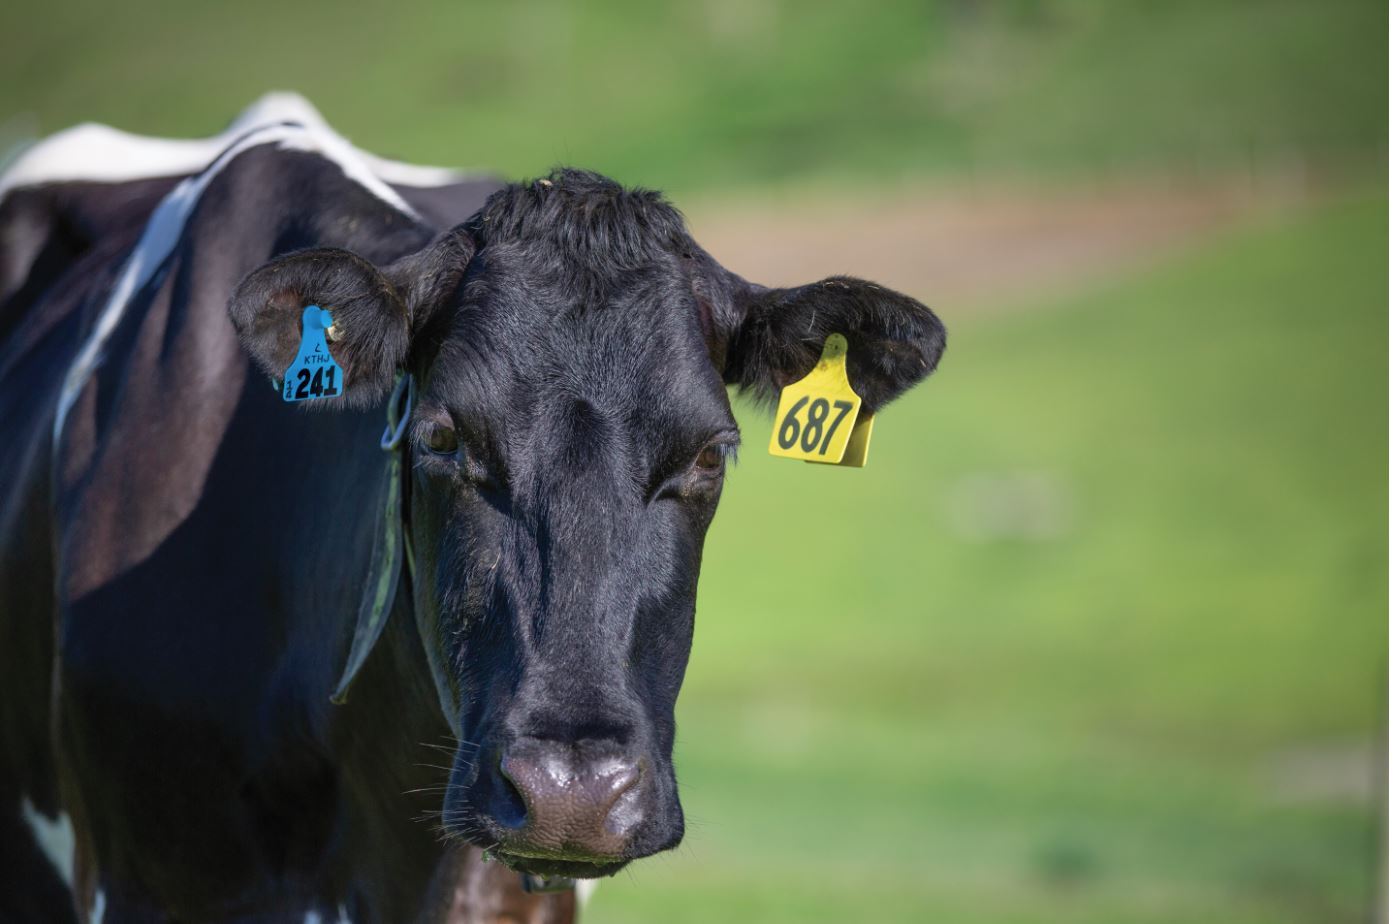 How to Find the Right Cattle Tags